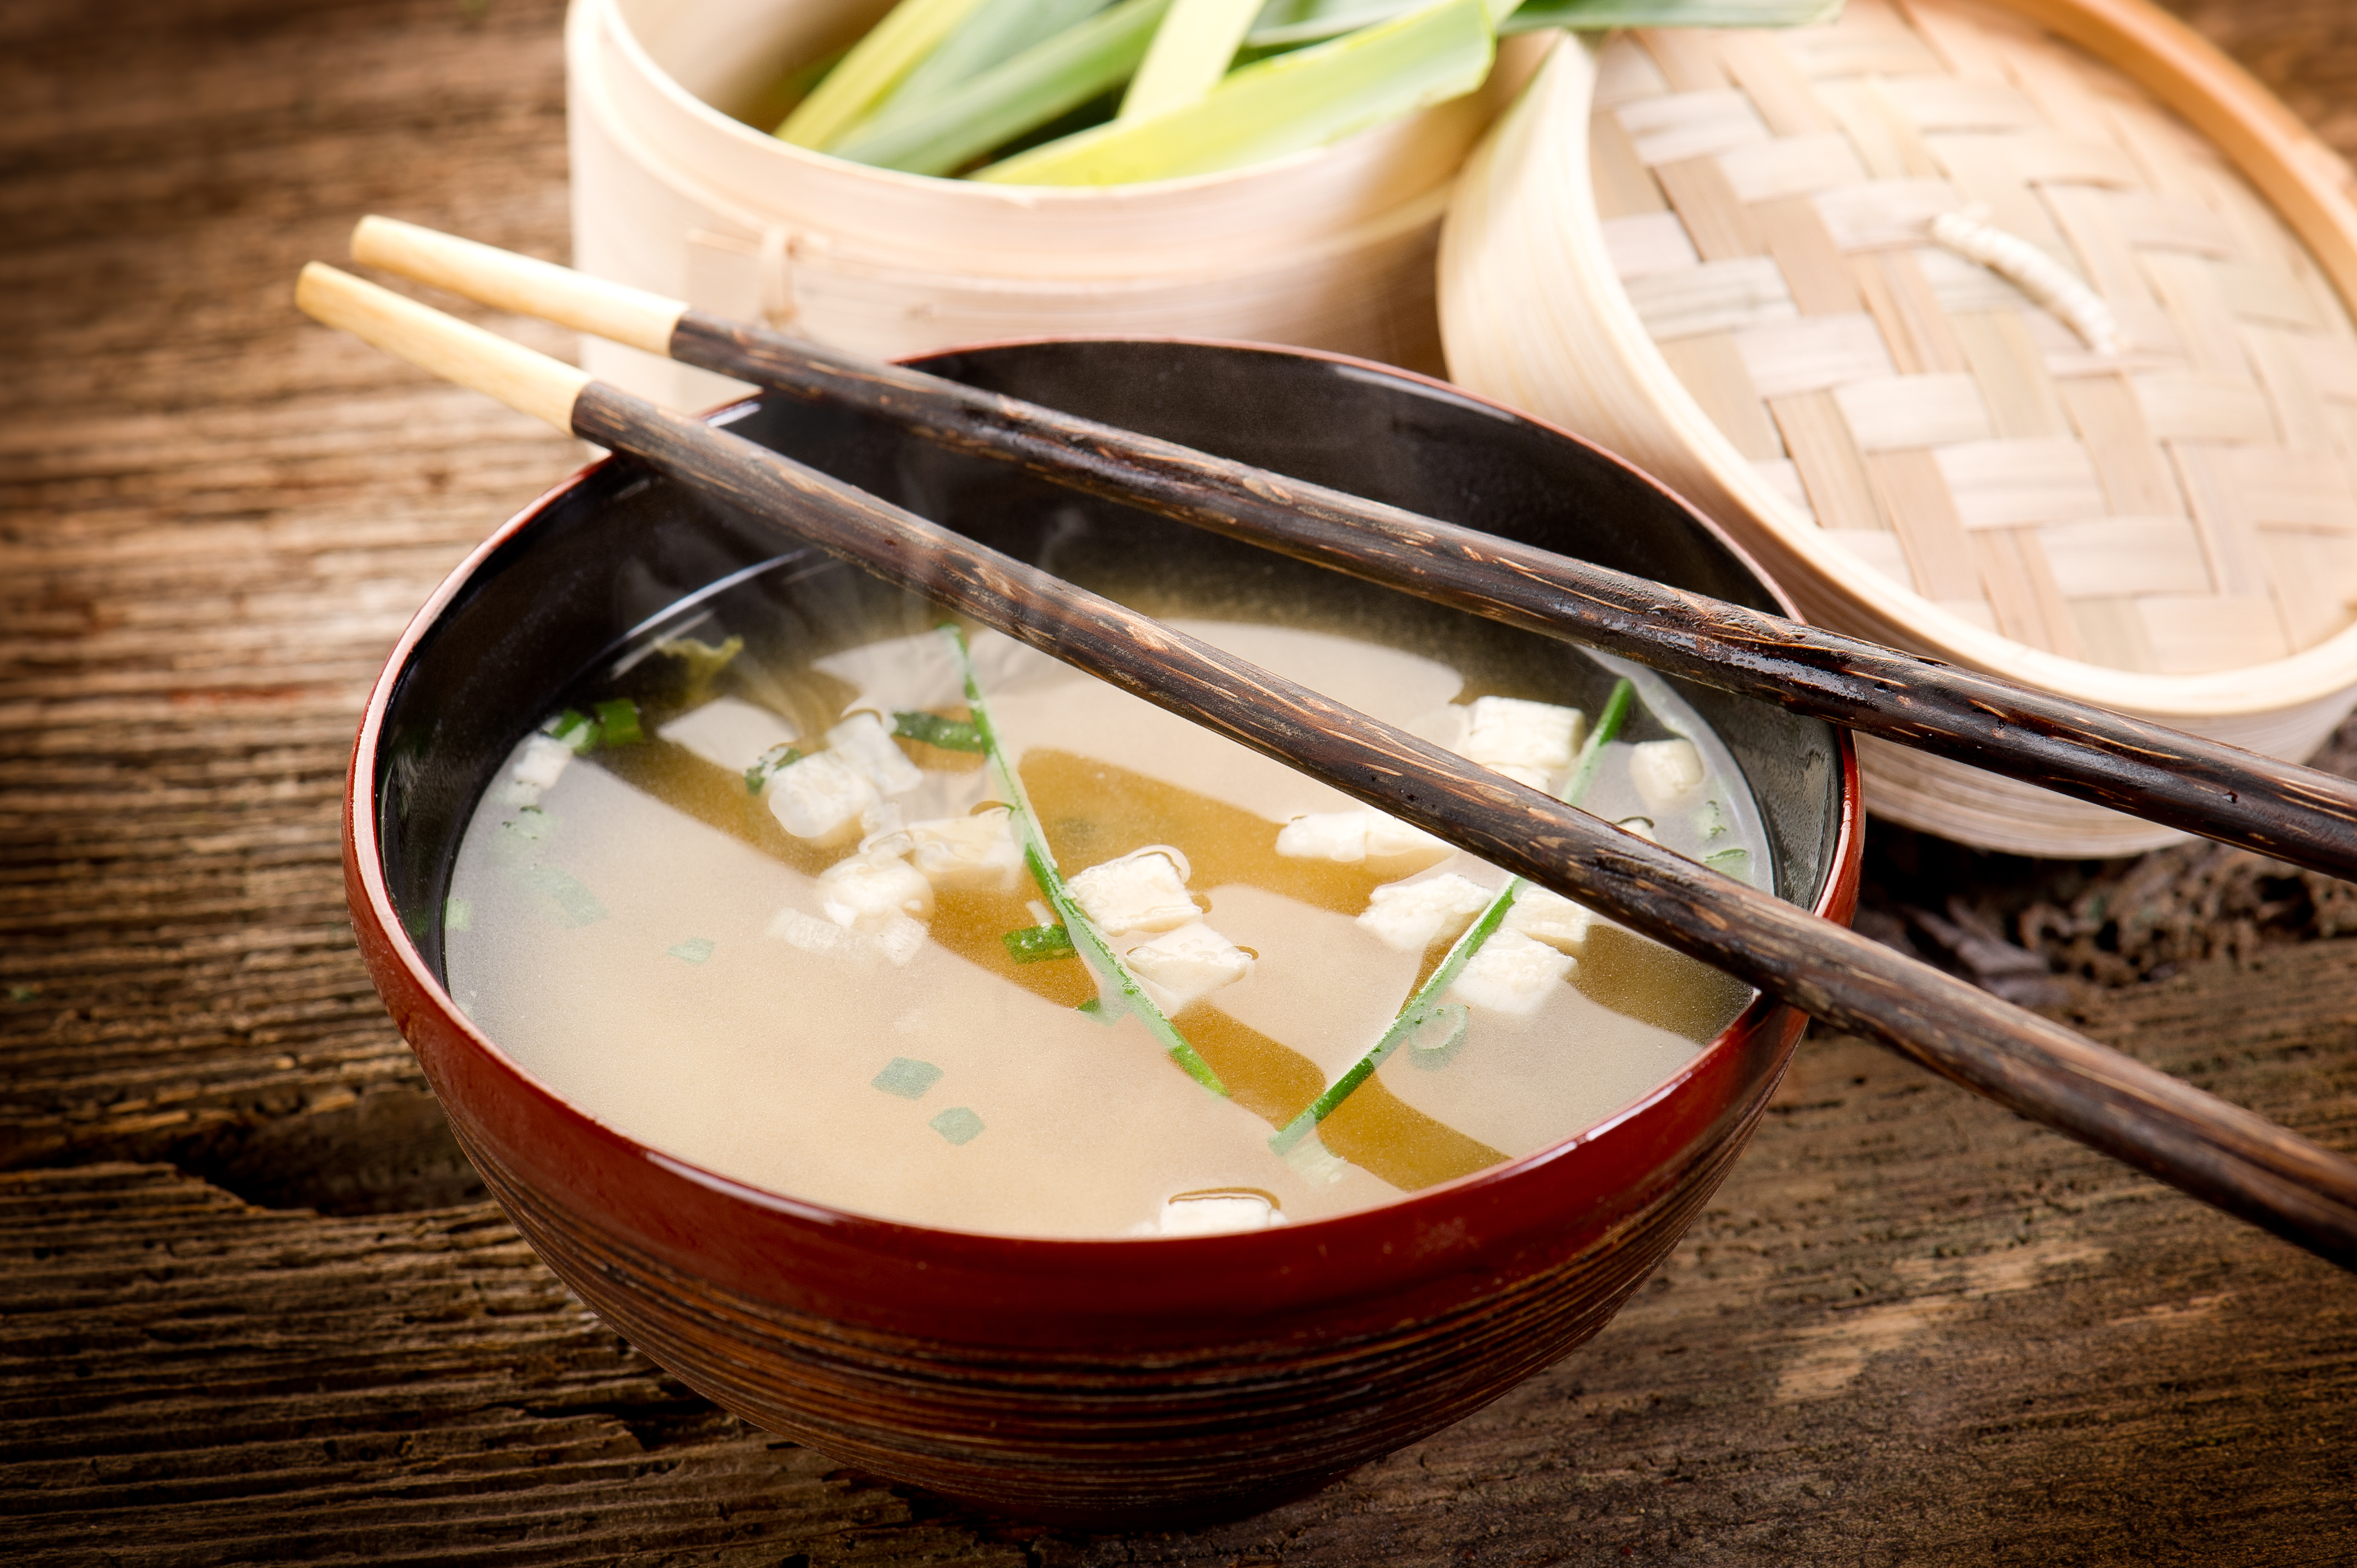 Miso soup: Asia's hot dish